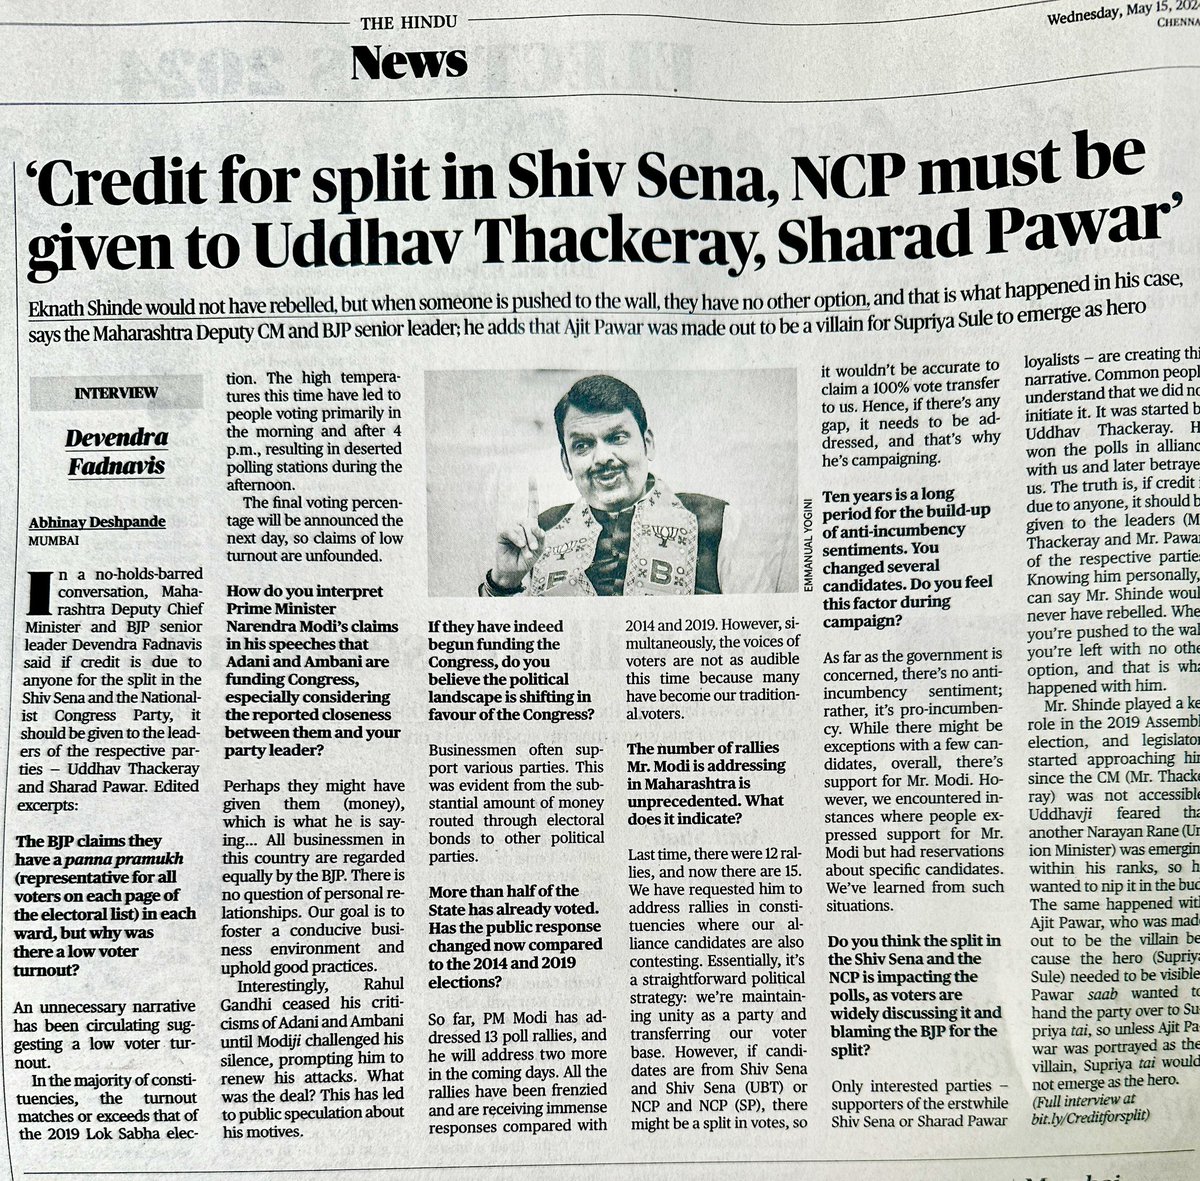 Read: a couple of excellent interviews, pertinent to #Election2024 scored by @the_hindu today - including @AmitShah and @Dev_Fadnavis